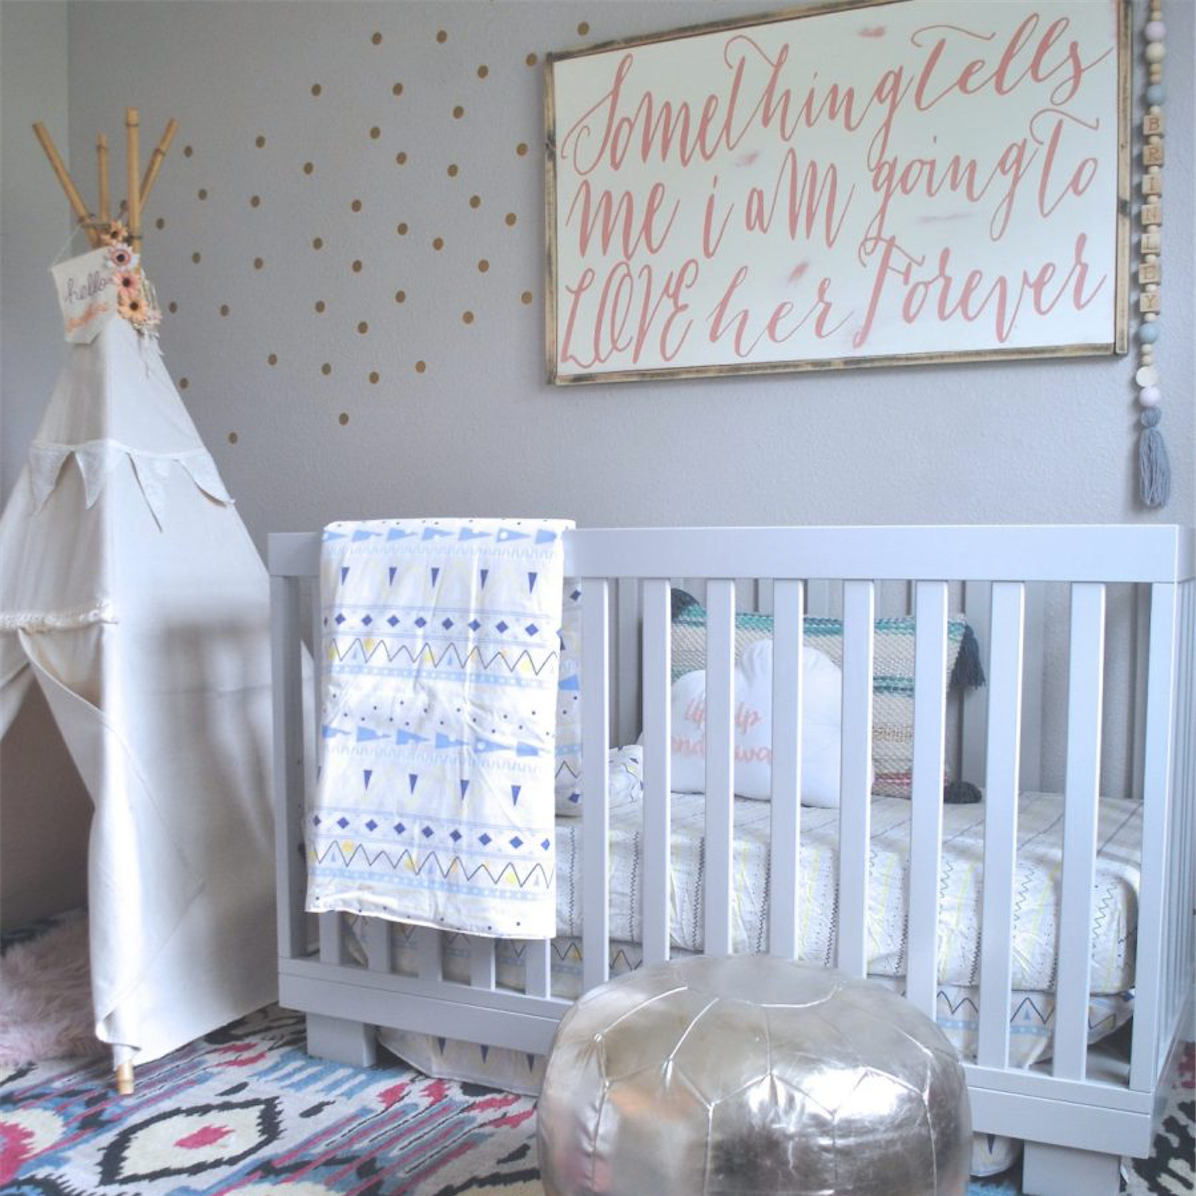 Gold Polka Dot Wall Decals DIY for your Nursery from rockymountaindecals.ca #nurseries #kidsrooms #kidsdecor